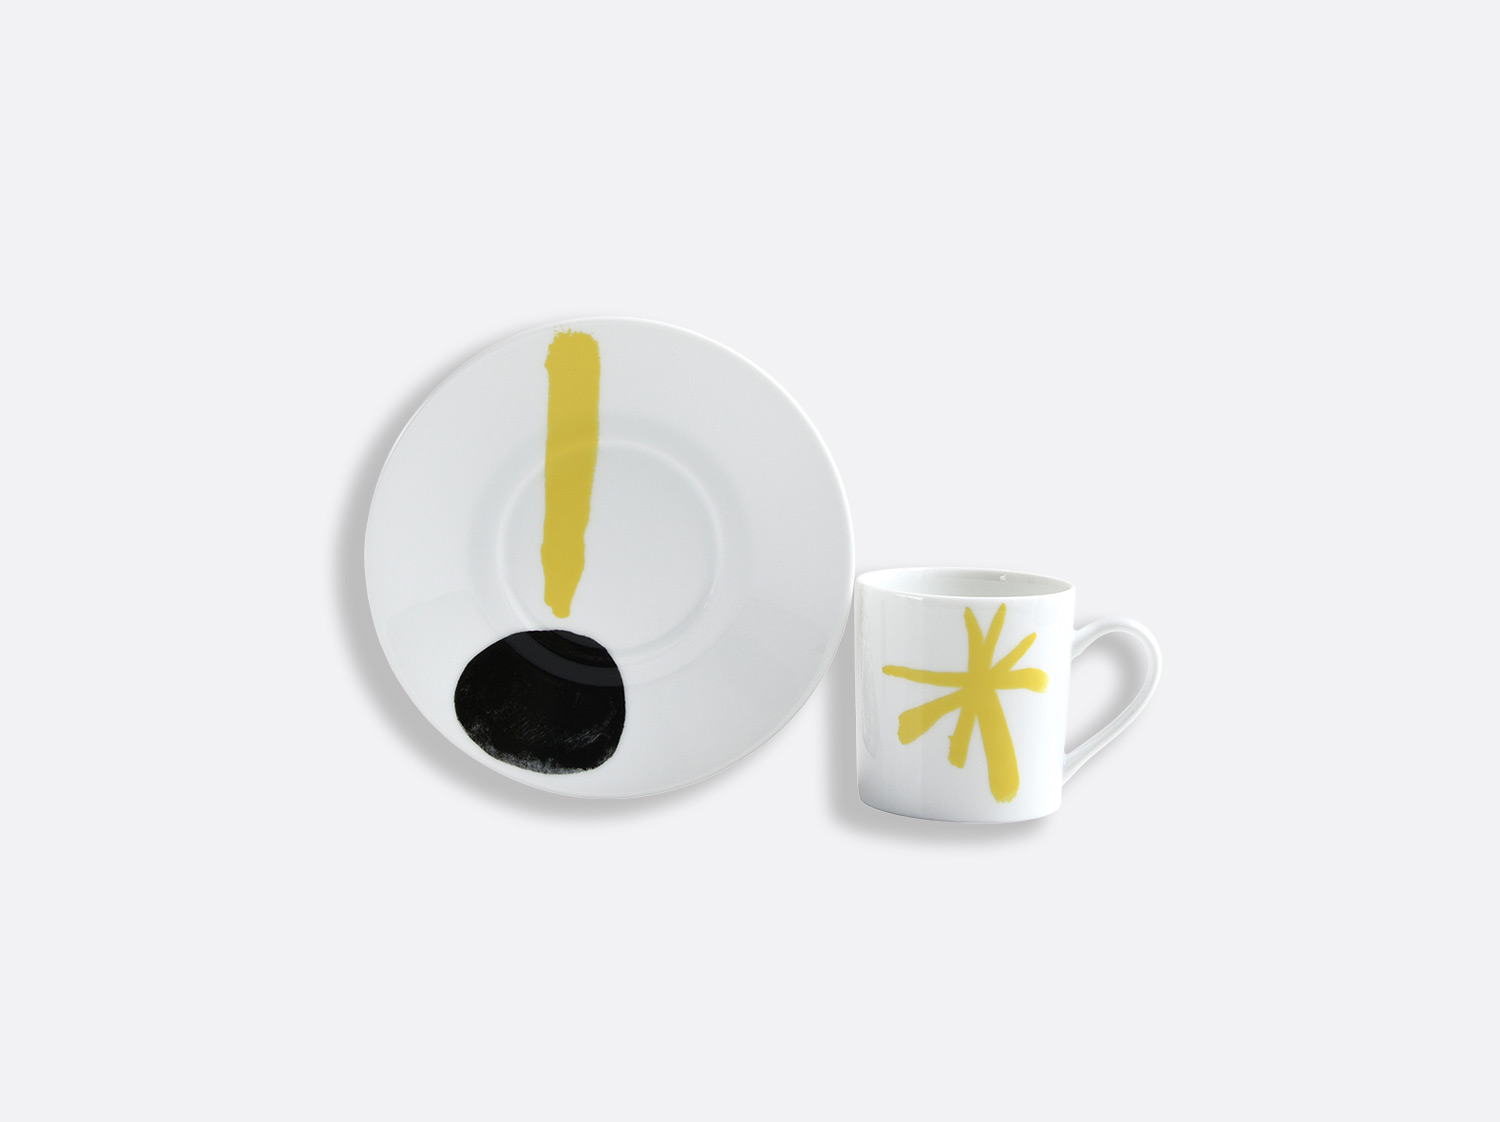 China 2 Espresso cups and saucers Yellow - Pages 15 & 61 of the collection PARLER SEUL - Joan Miro | Bernardaud